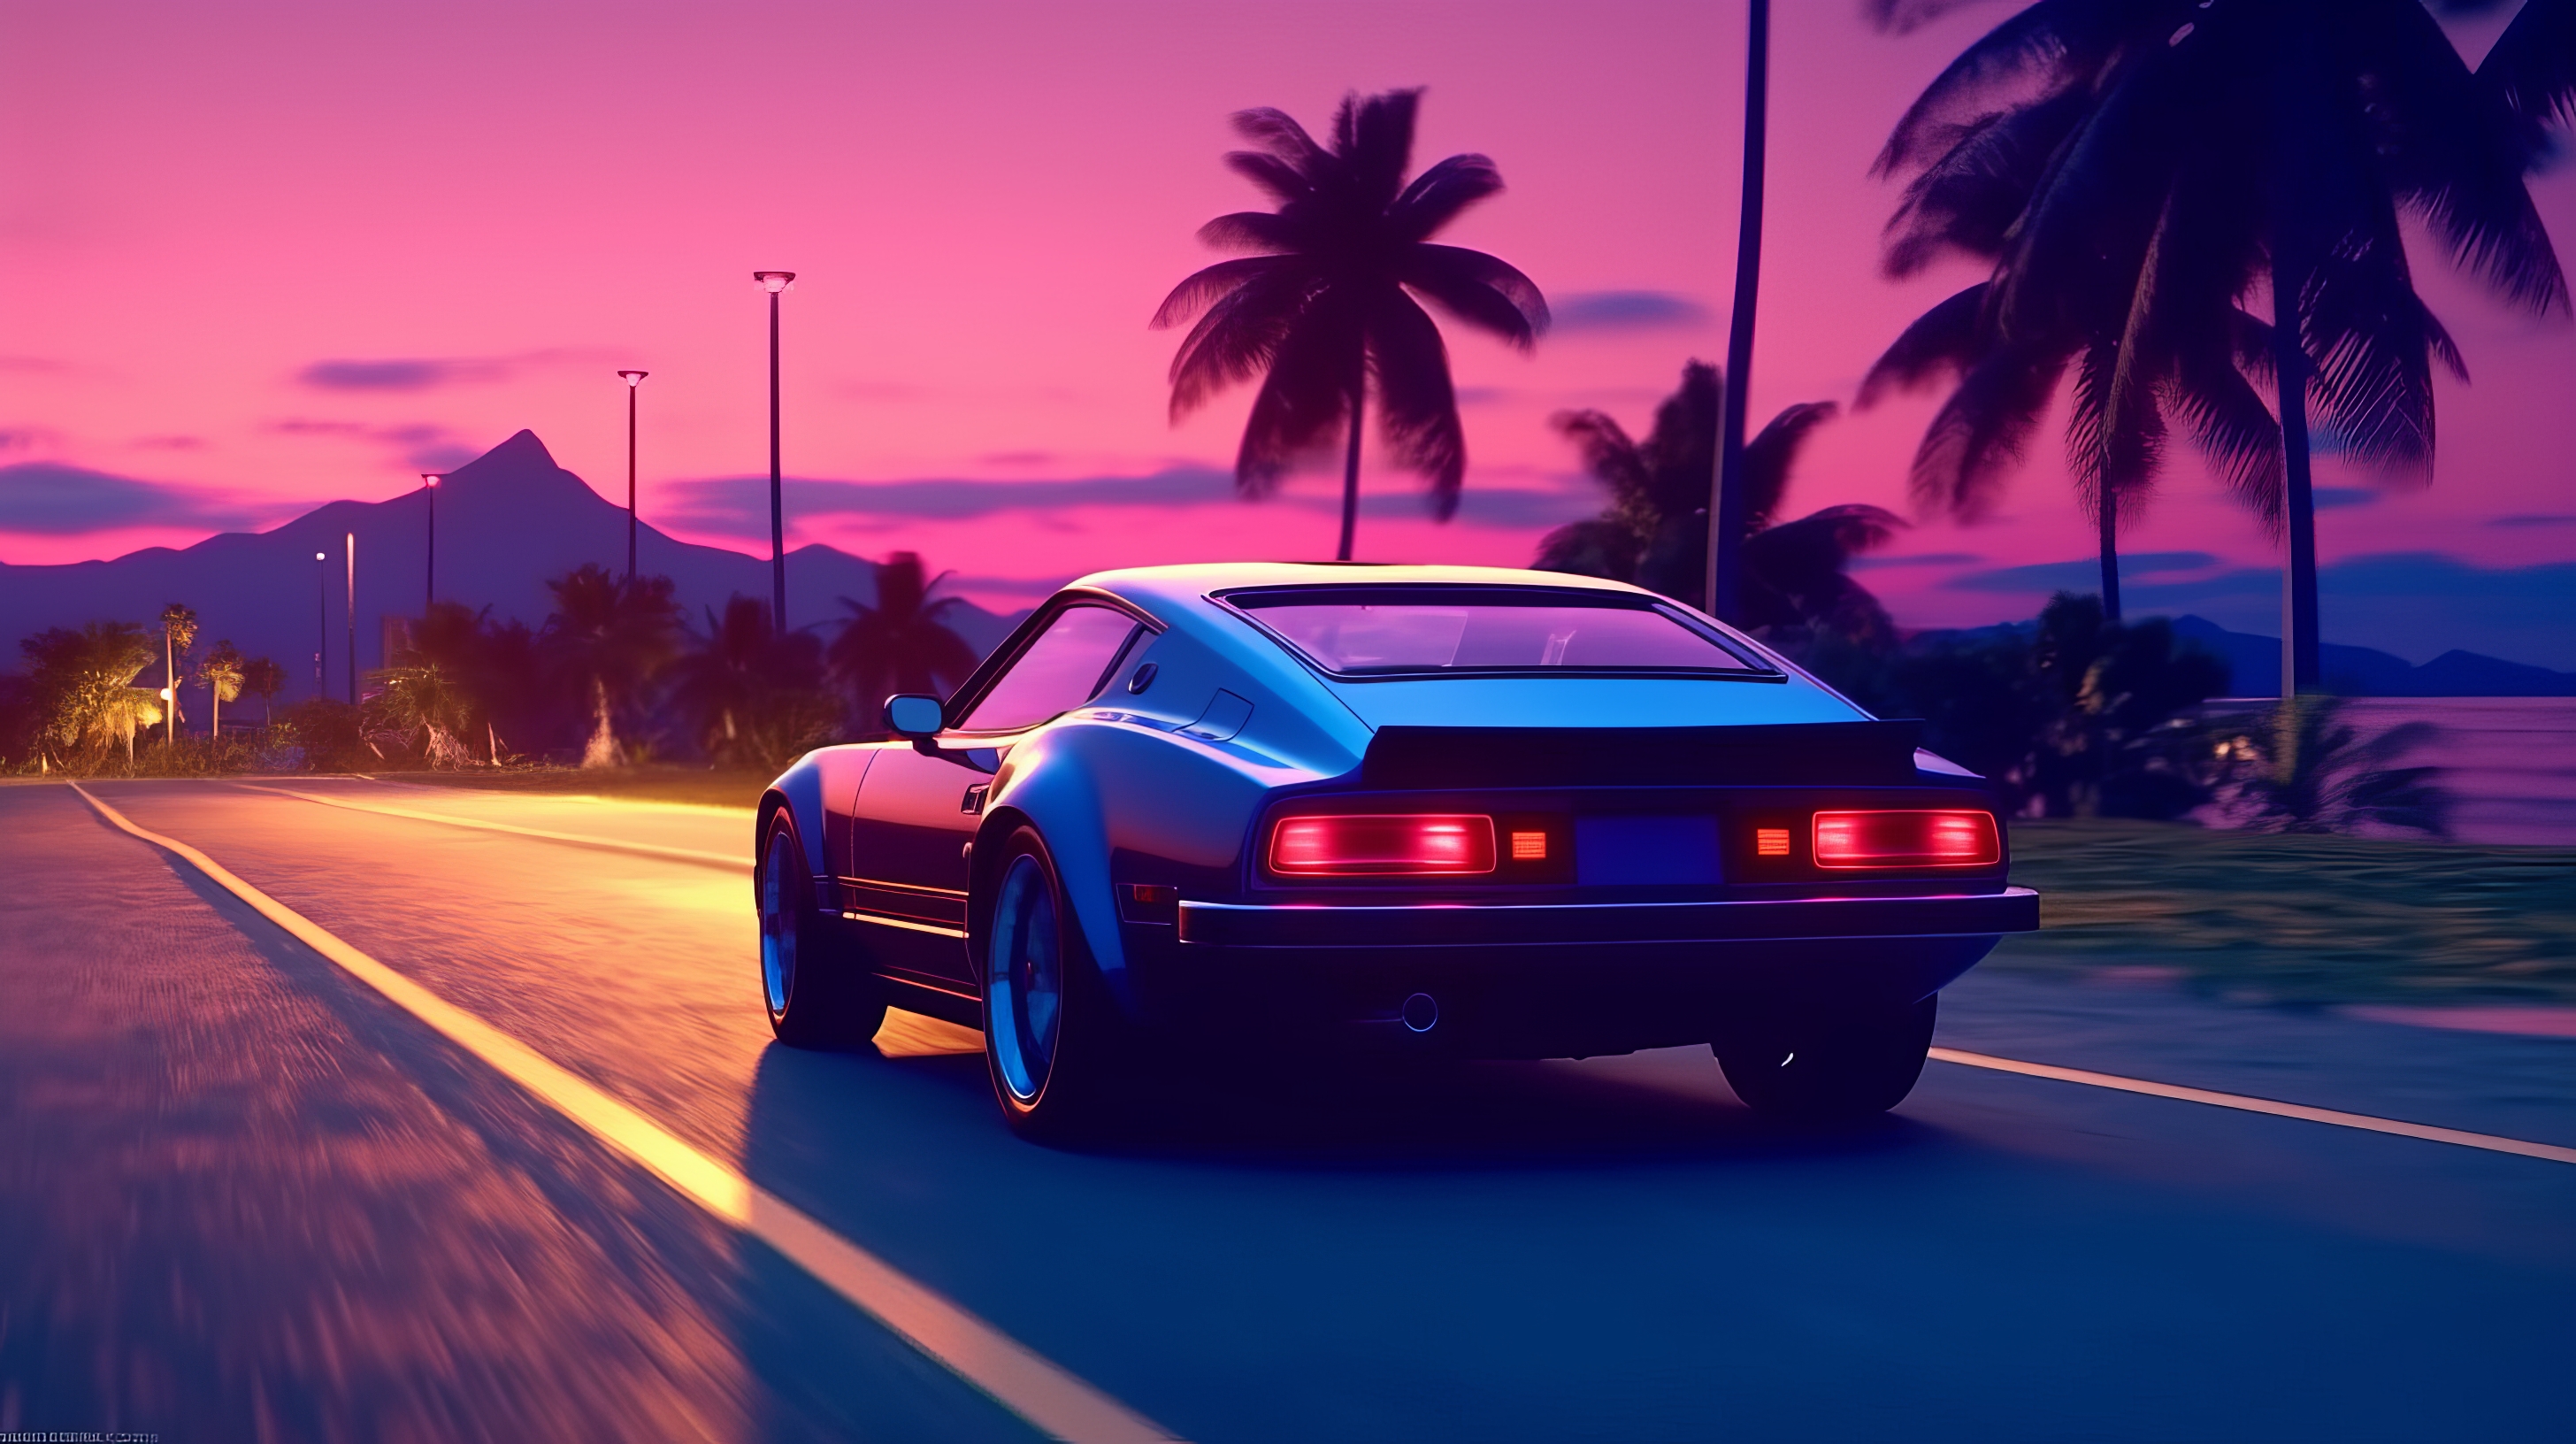 General 2912x1632 AI art car sports car synthwave Retro Wave driving road Blue hour colorful palm trees rear view taillights sunset sunset glow clouds sky mountains street light